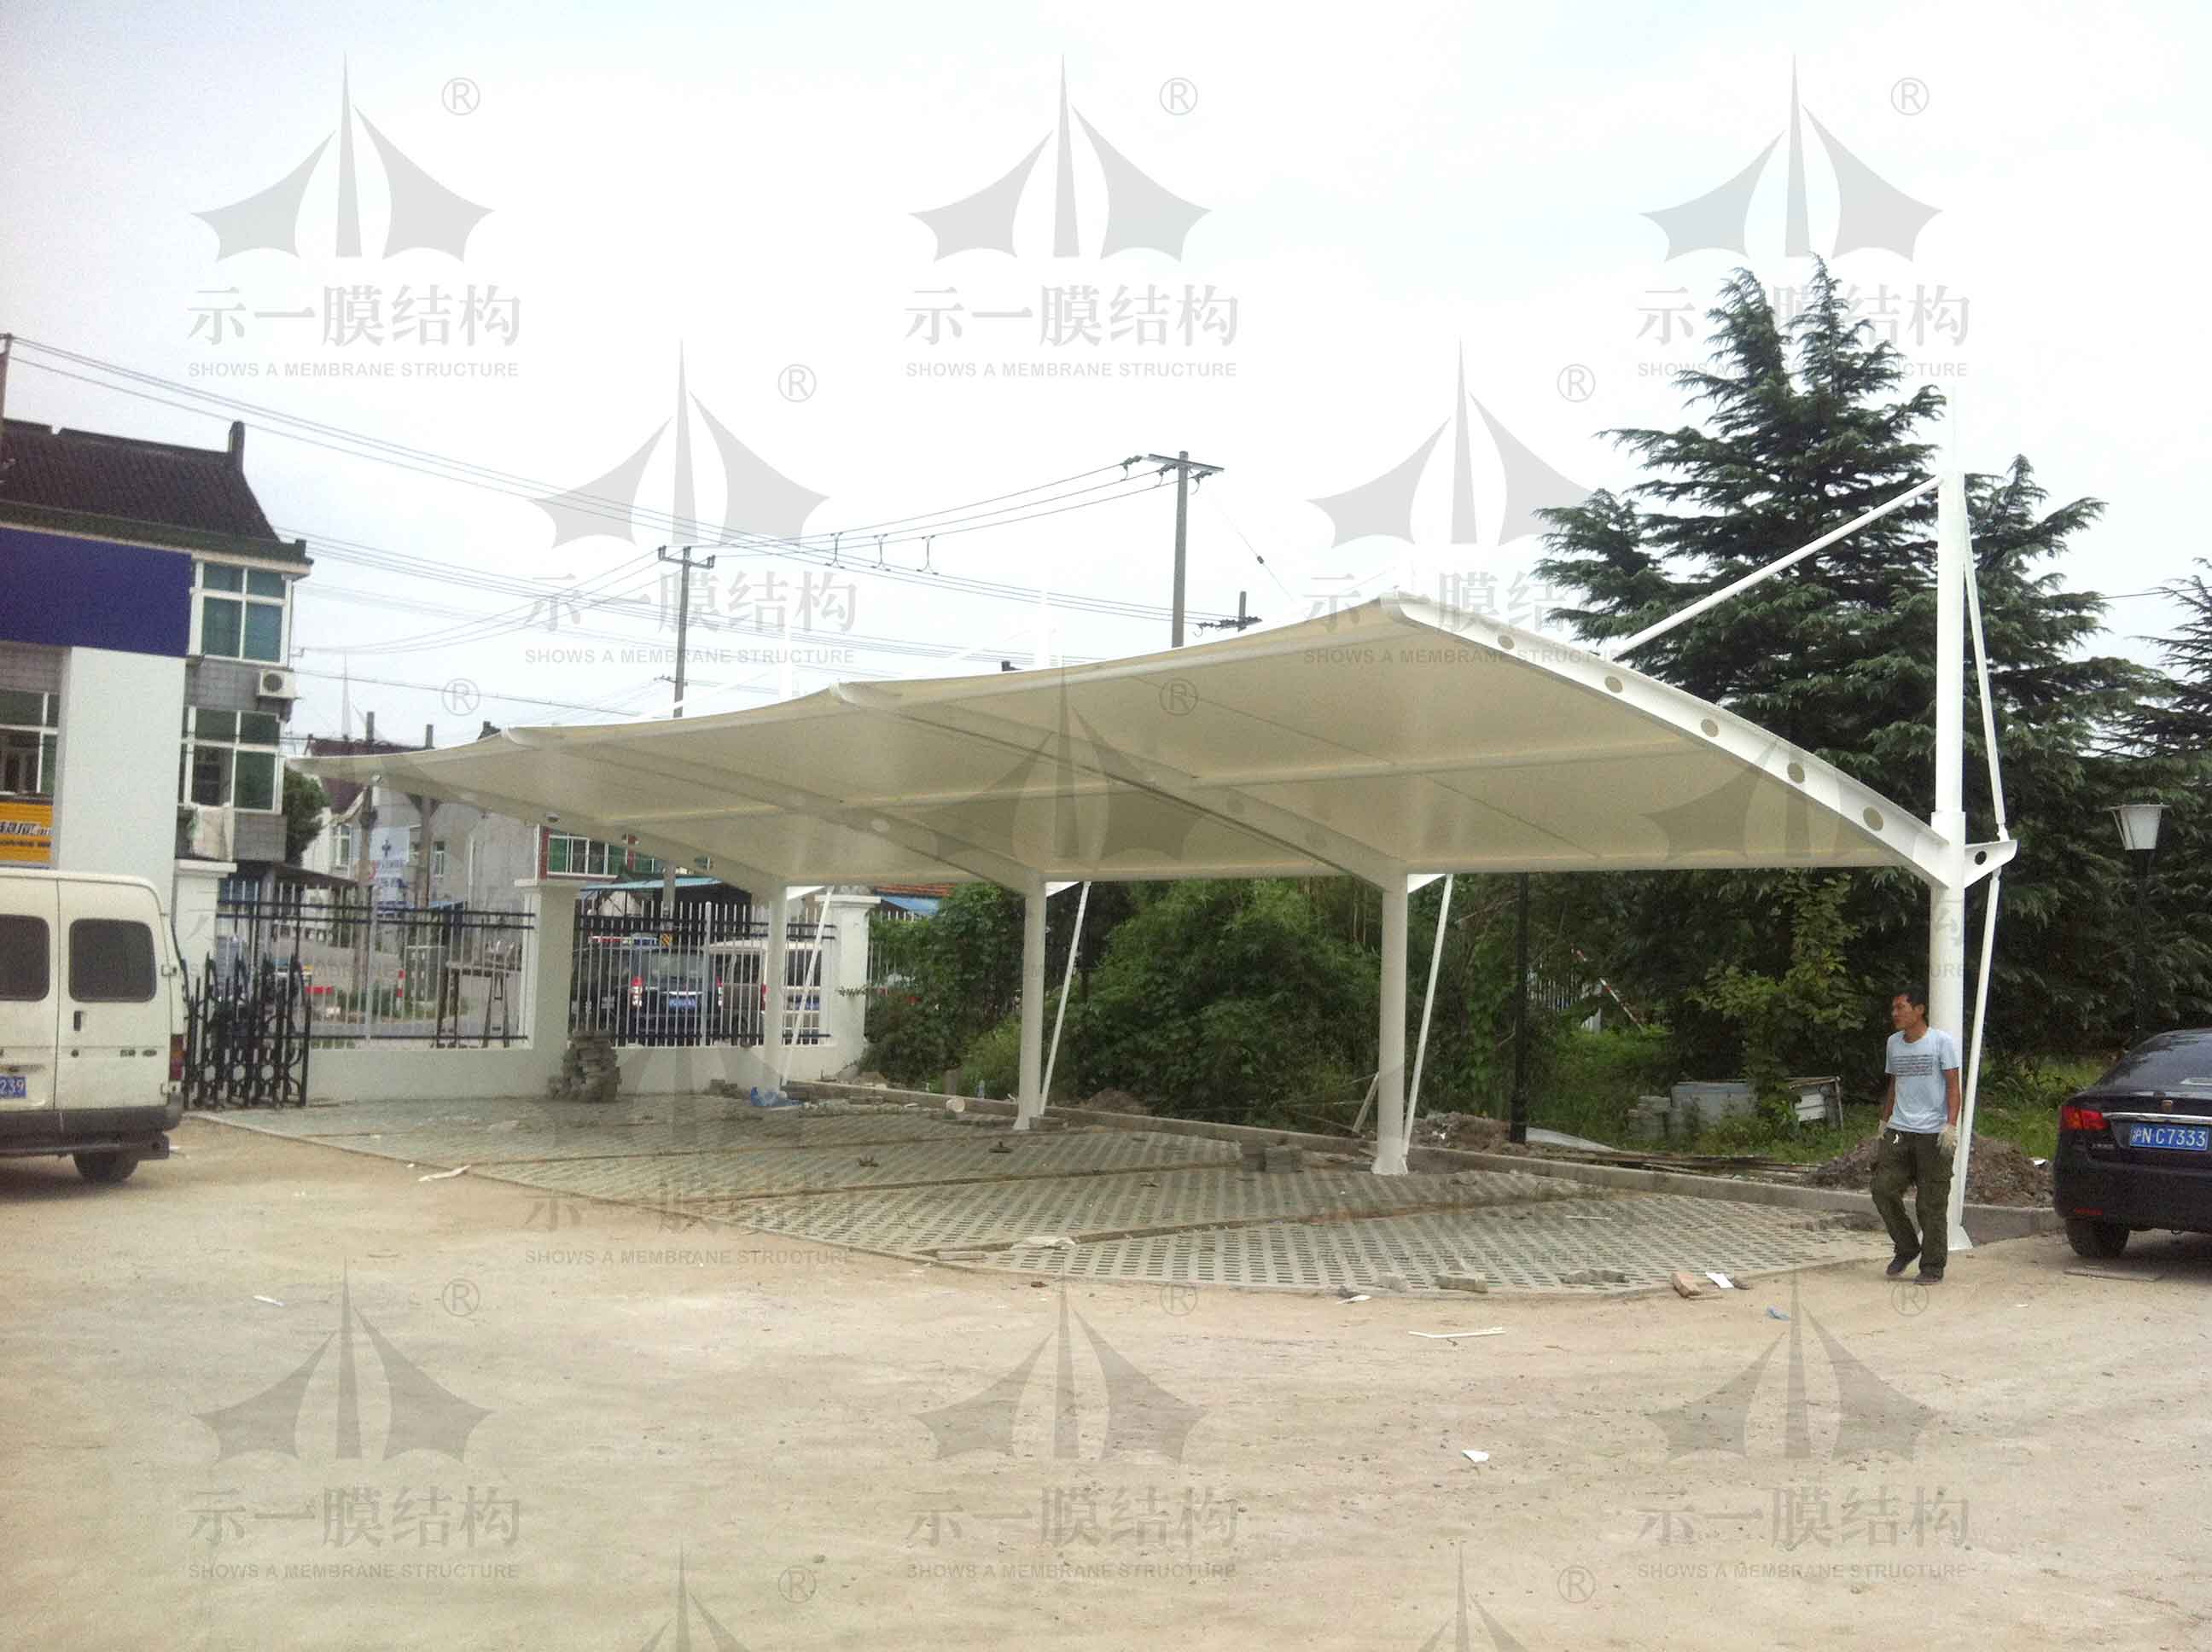 How to make the membrane structure carport avoid rust?